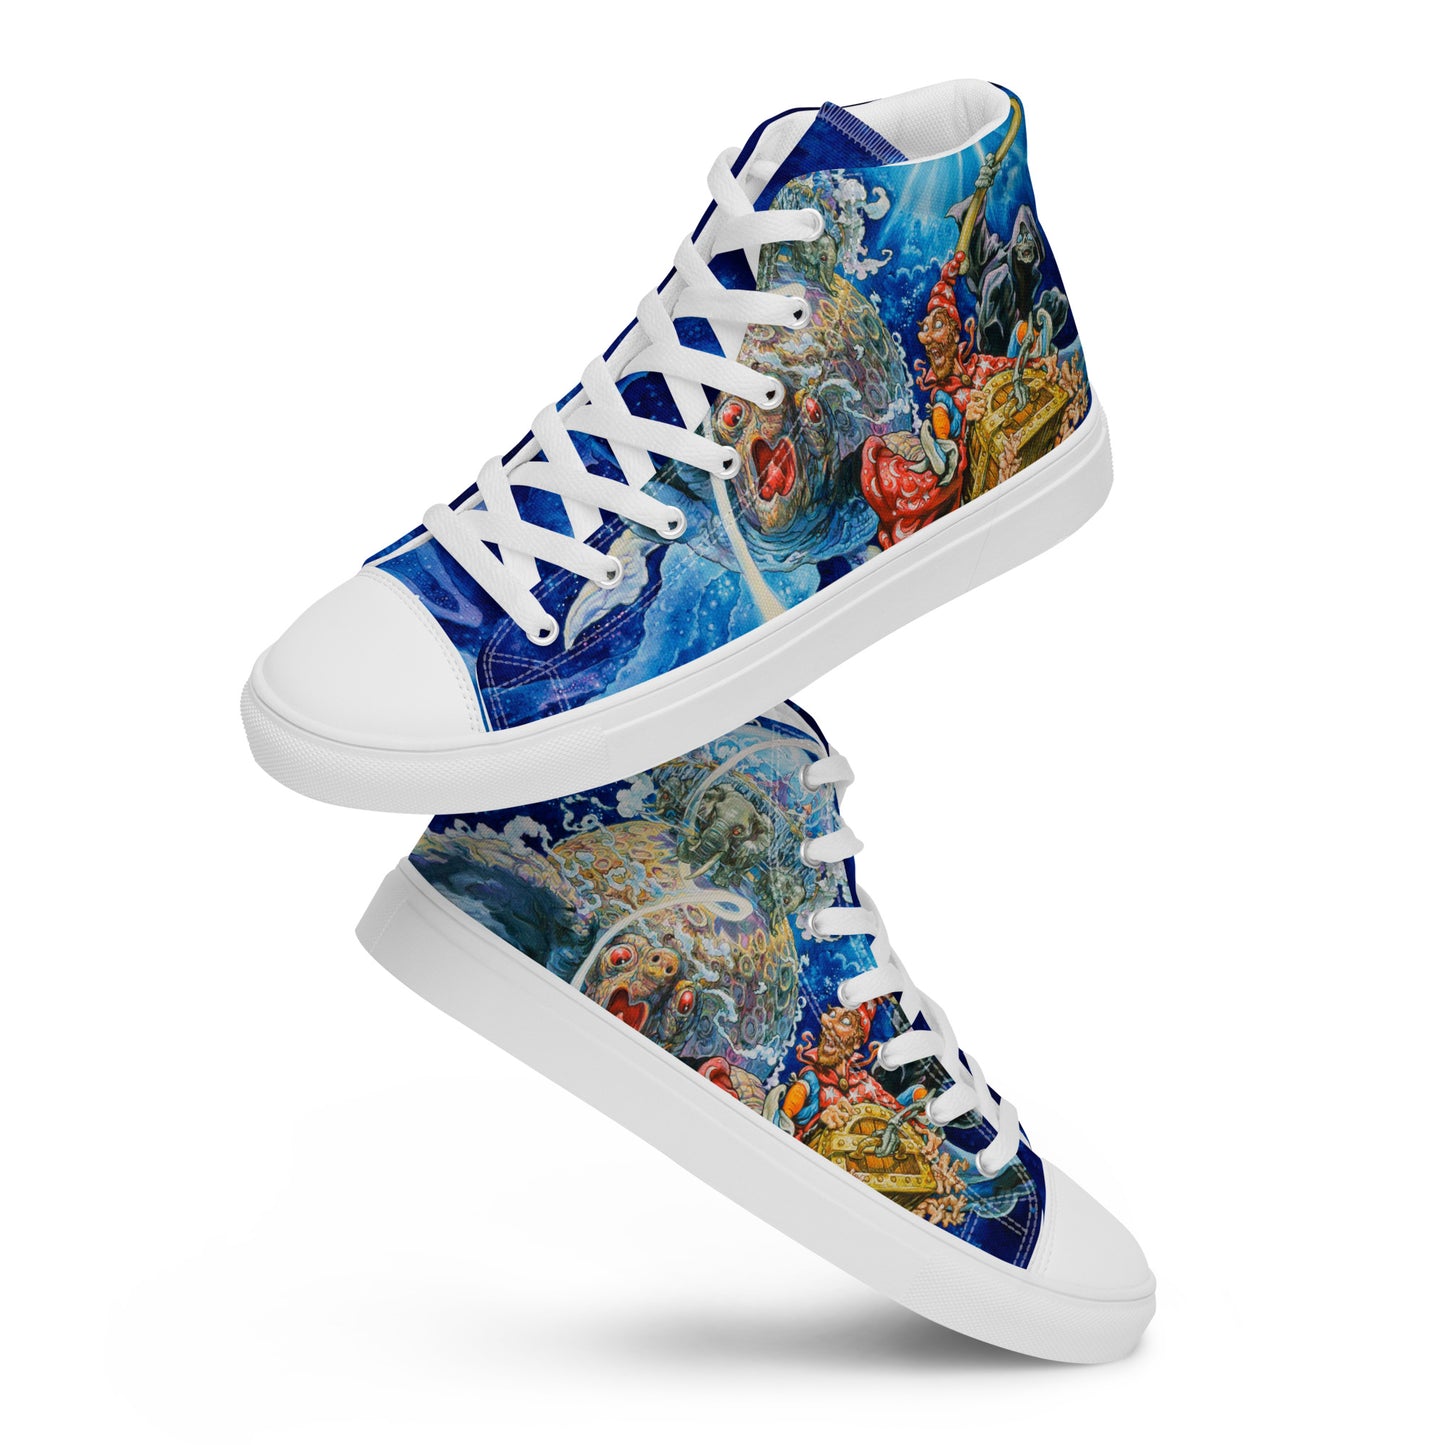 Discworld III Men’s High Top Canvas Shoes - Free shipping! *US SIZES SHOWN! USE CHART!